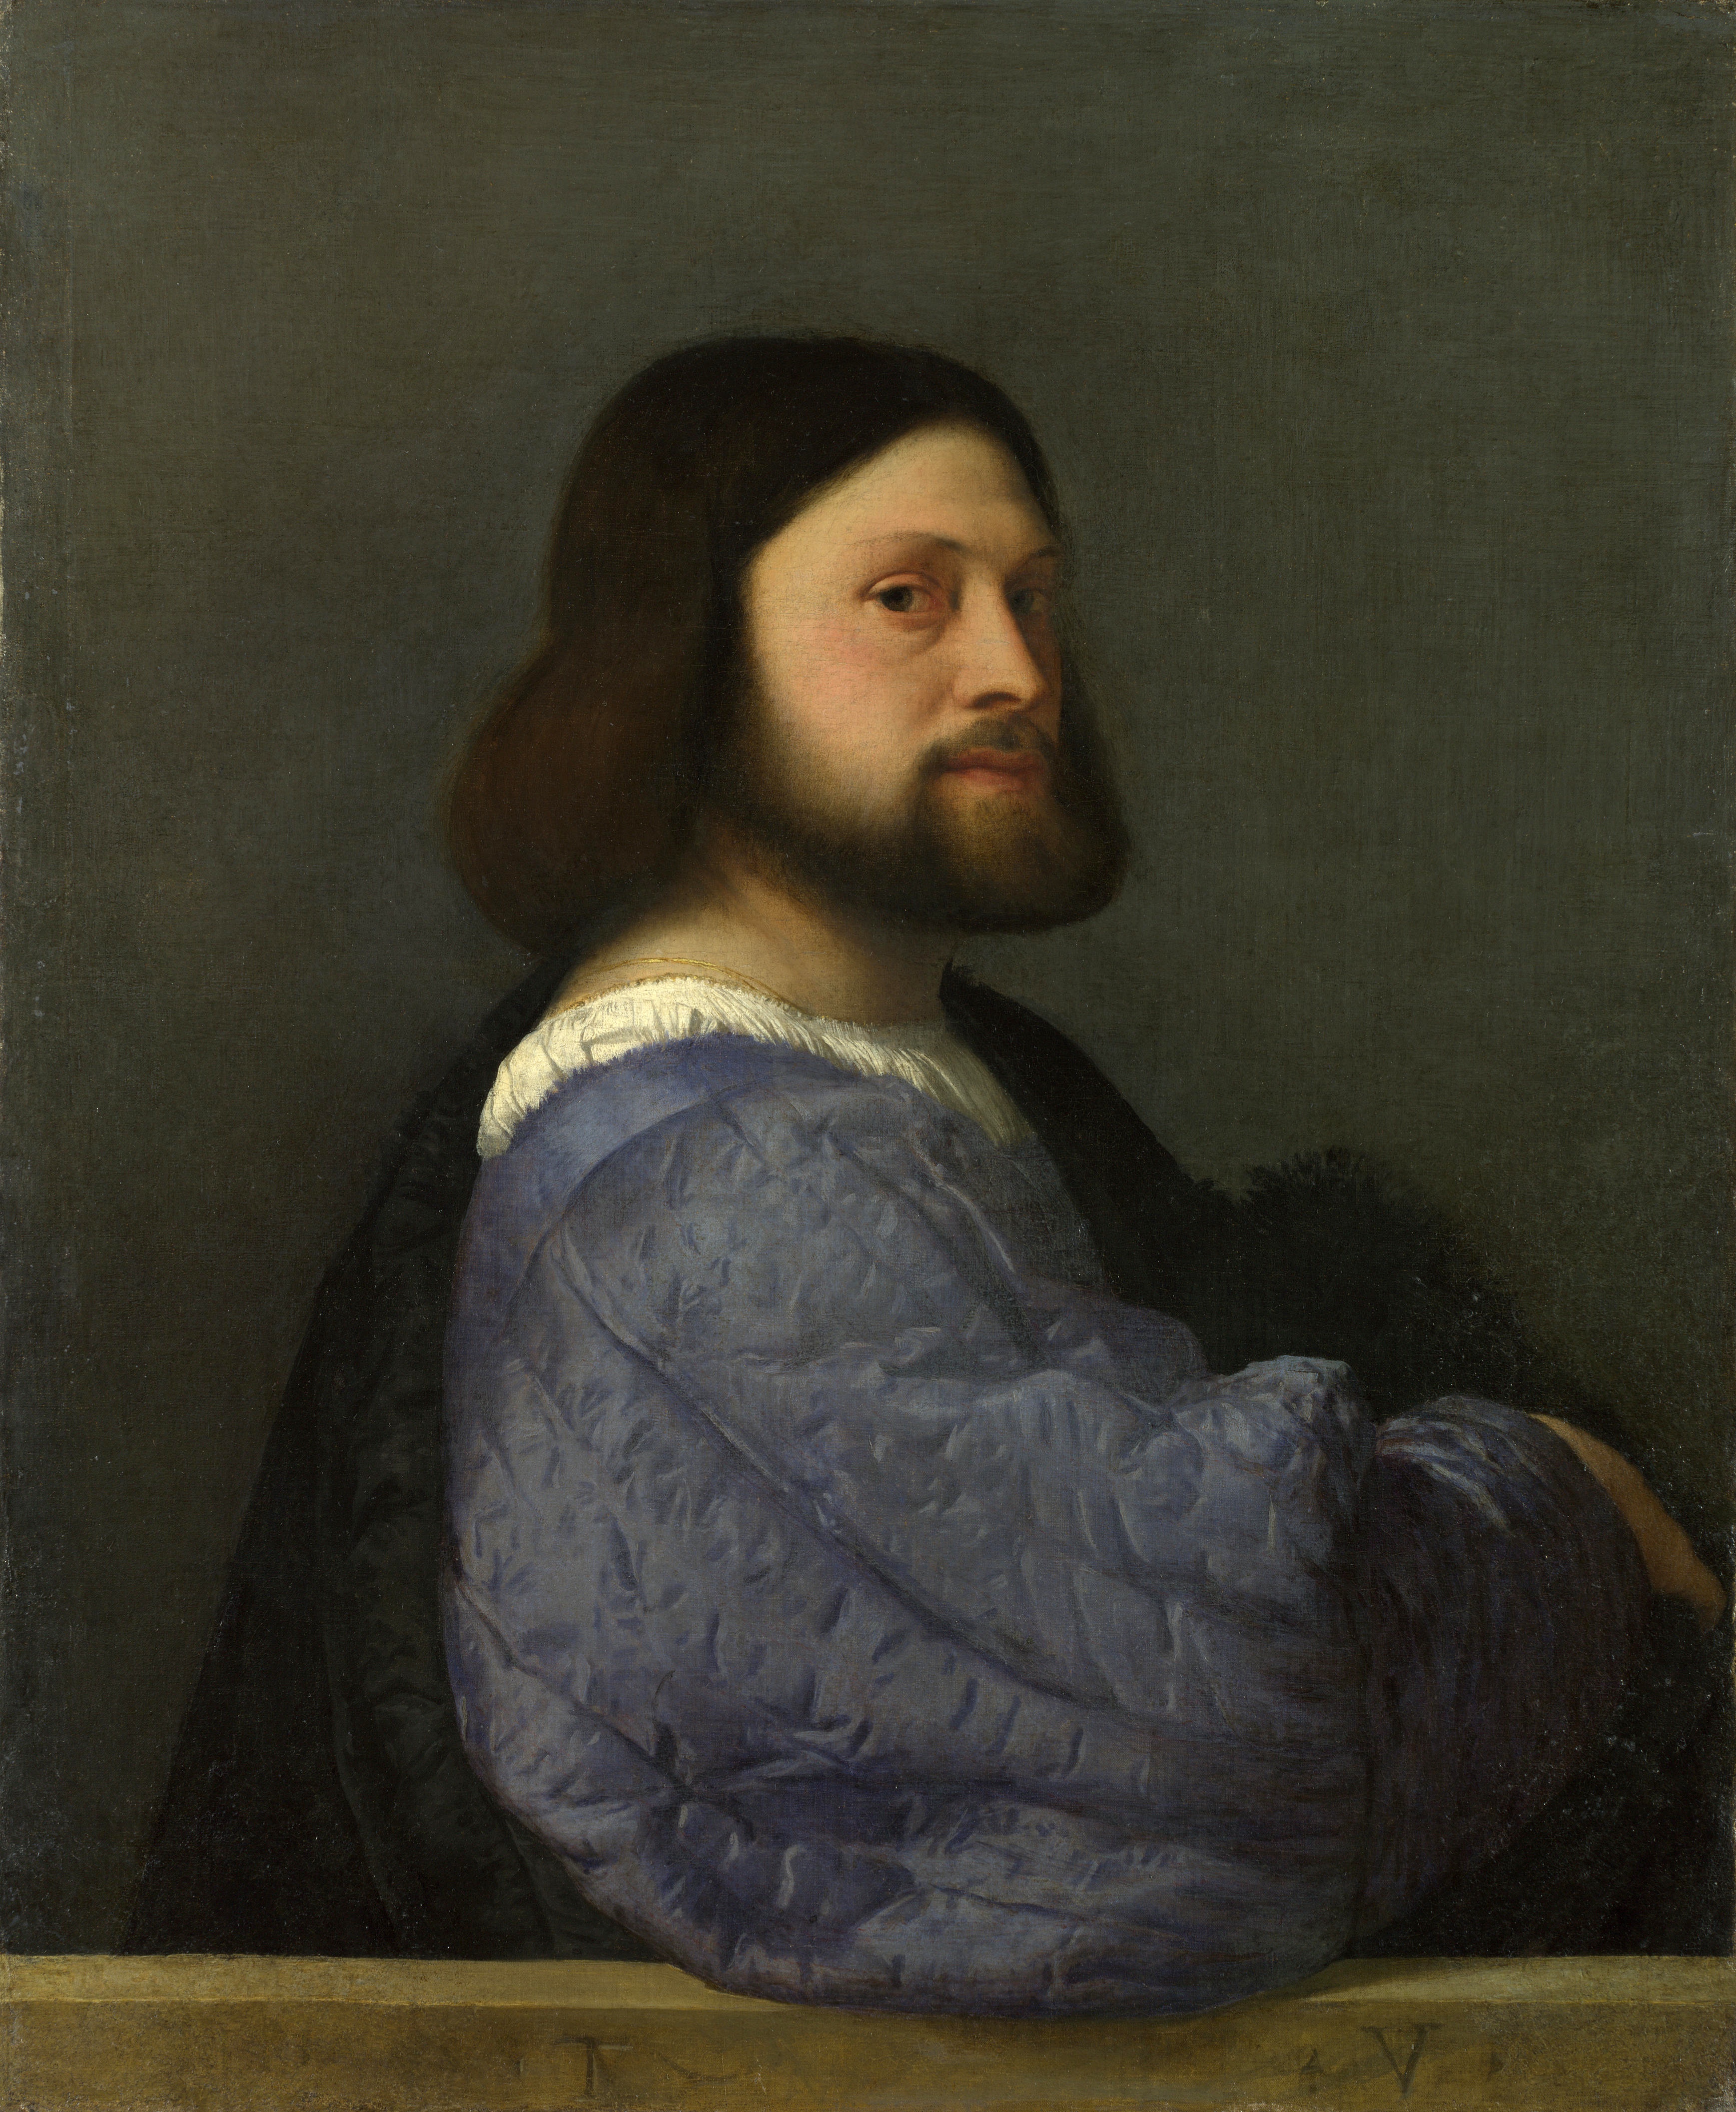 titian_portrait_of_a_man_with_a_quilted_sleeve.jpg